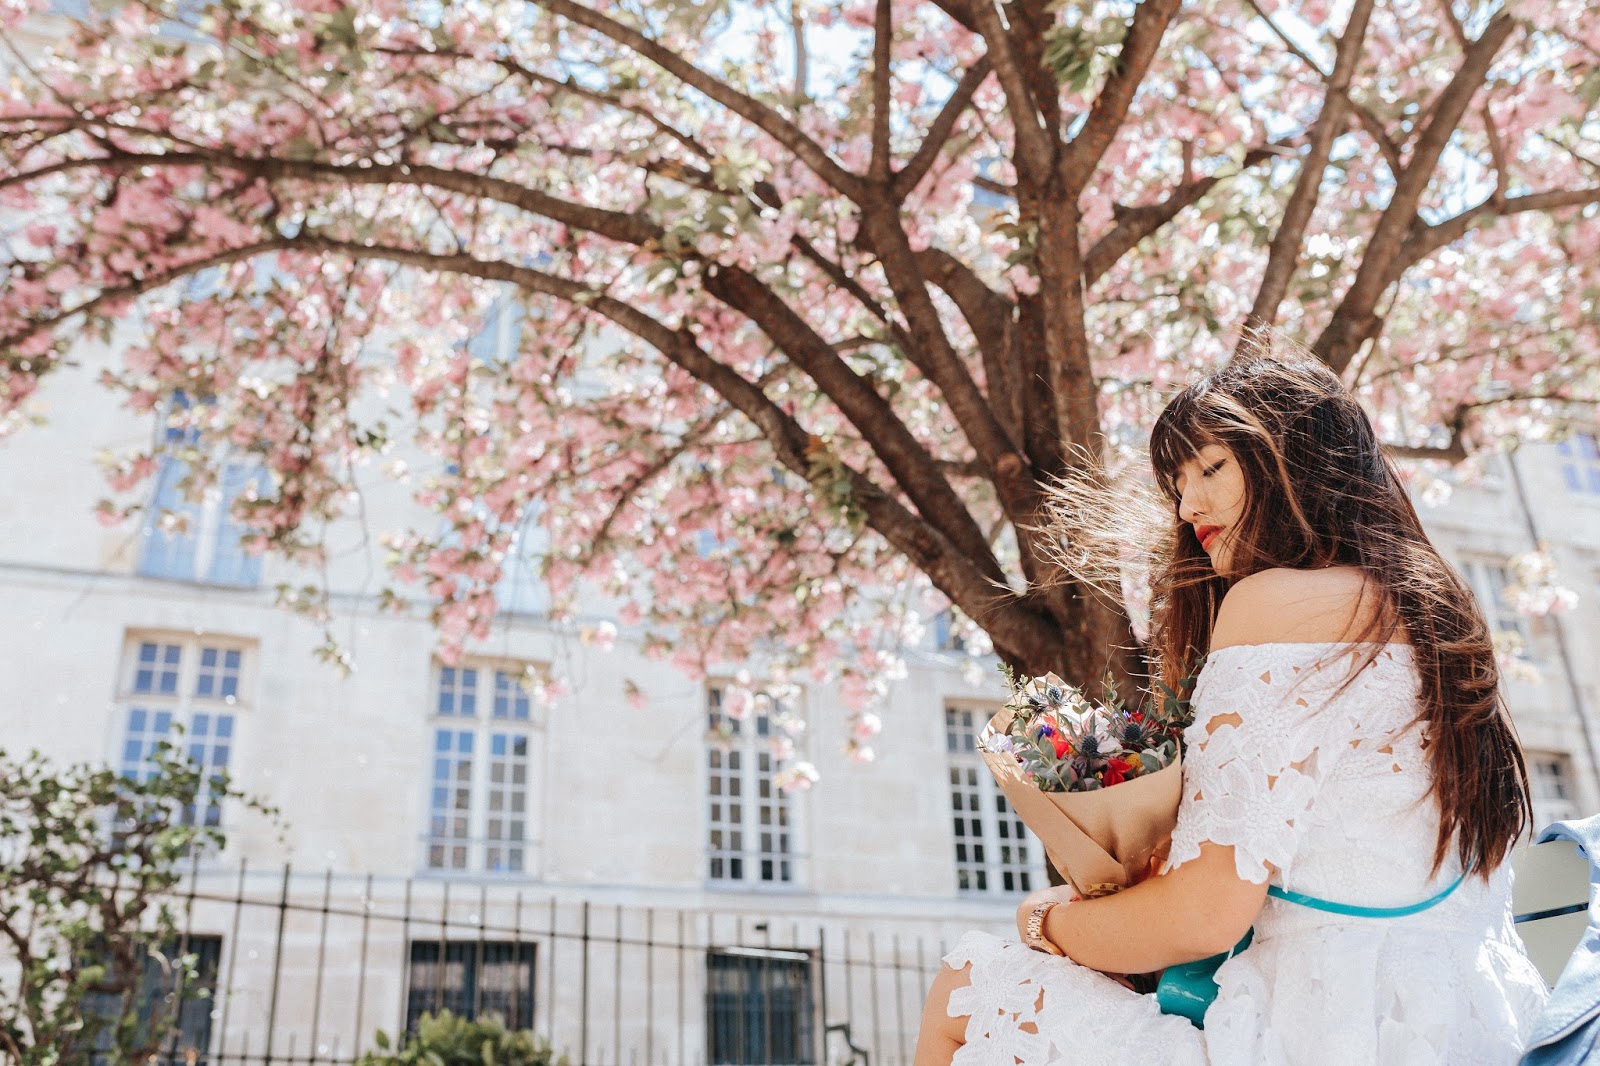 meet me in paree, blogger, fashion, look, style, paris, parisian style, summer style, chiicwish